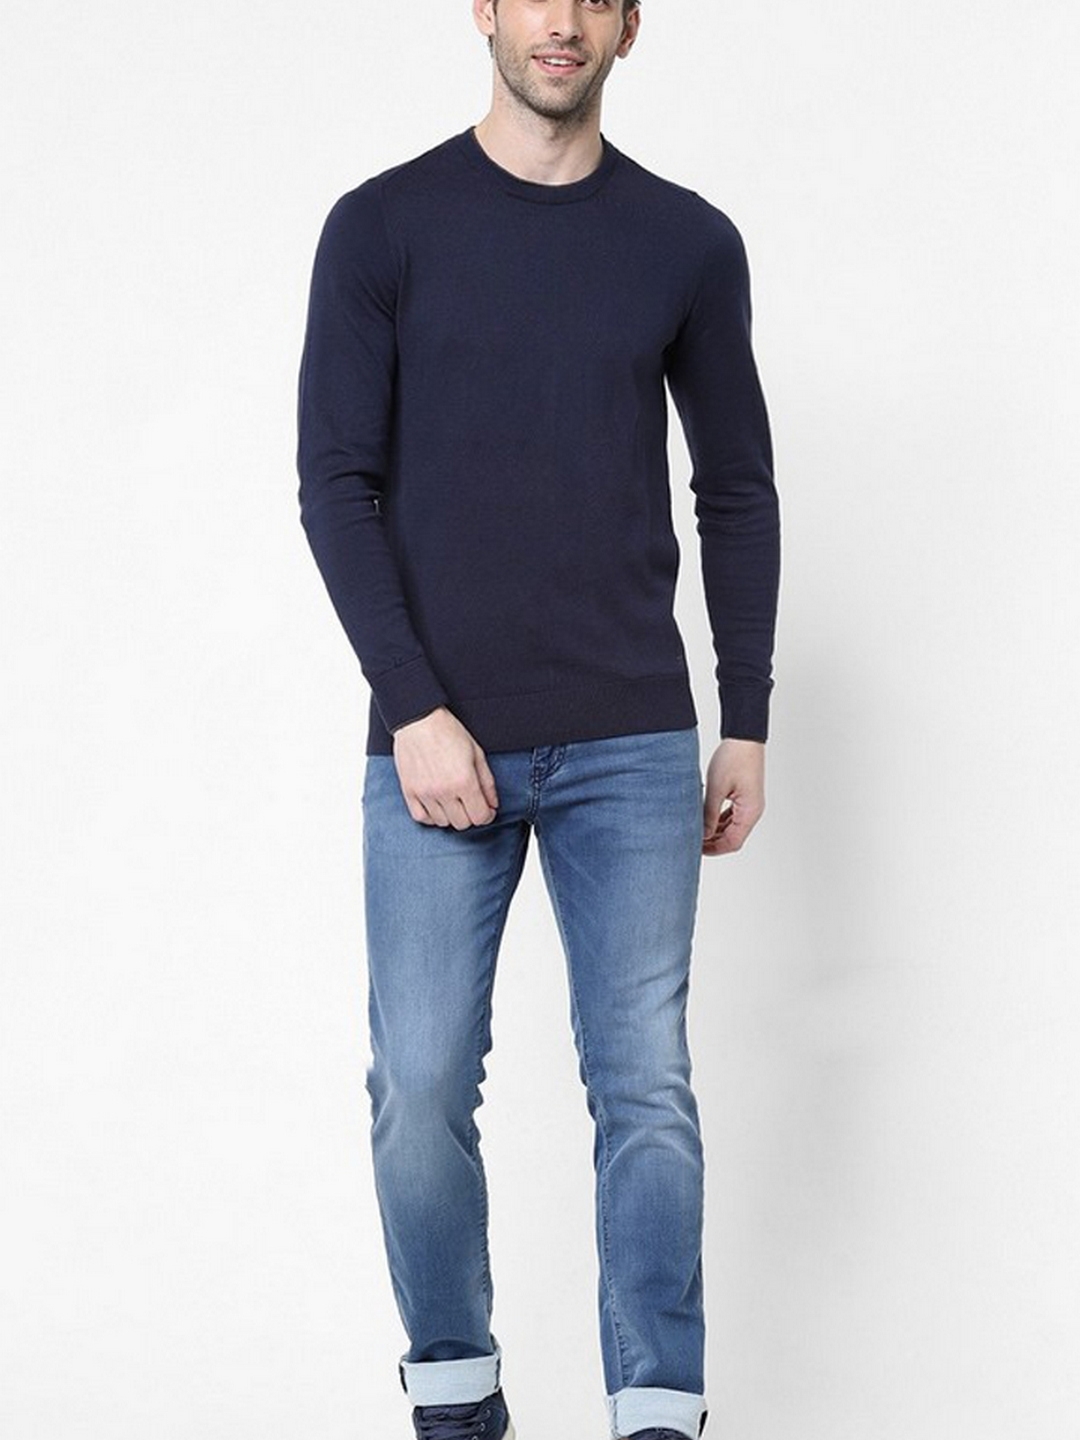 Janni Round-Neck Sweater with Contrast Elbow Patches